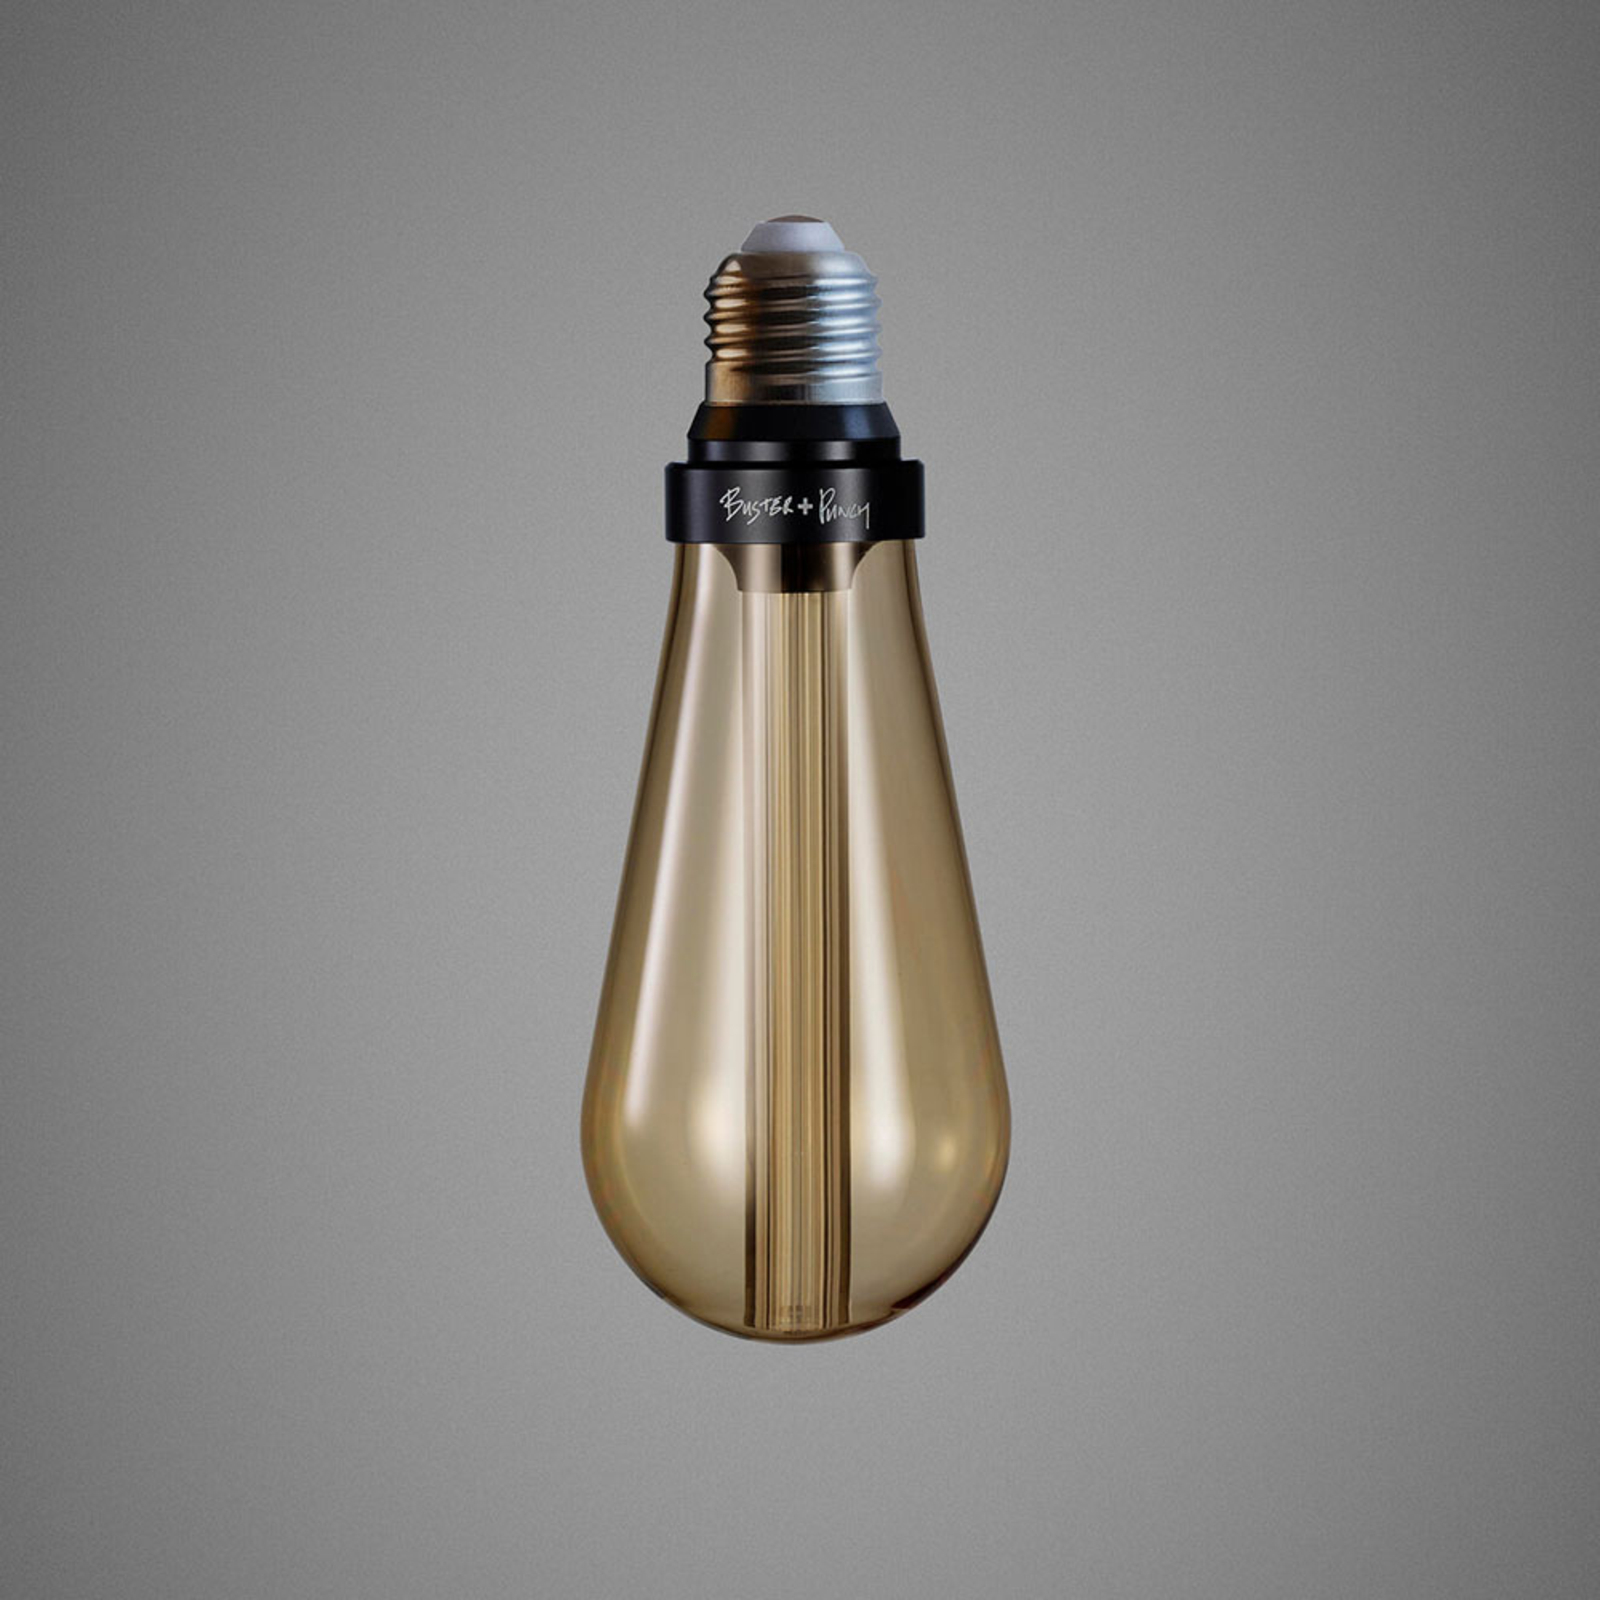 Buster + Punch LED bulb E27 2 W dimmable gold